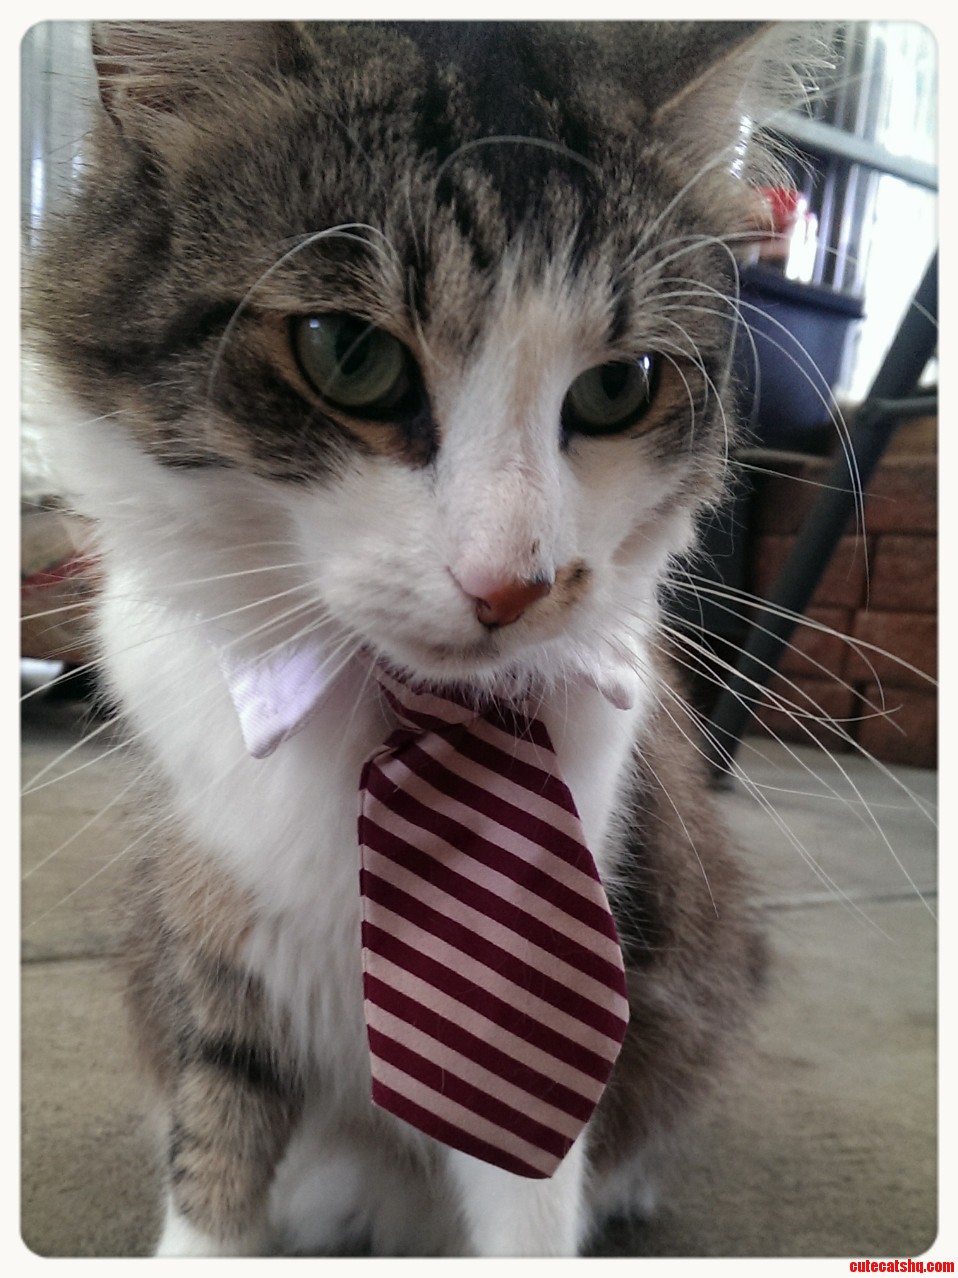 Dustin the business cat